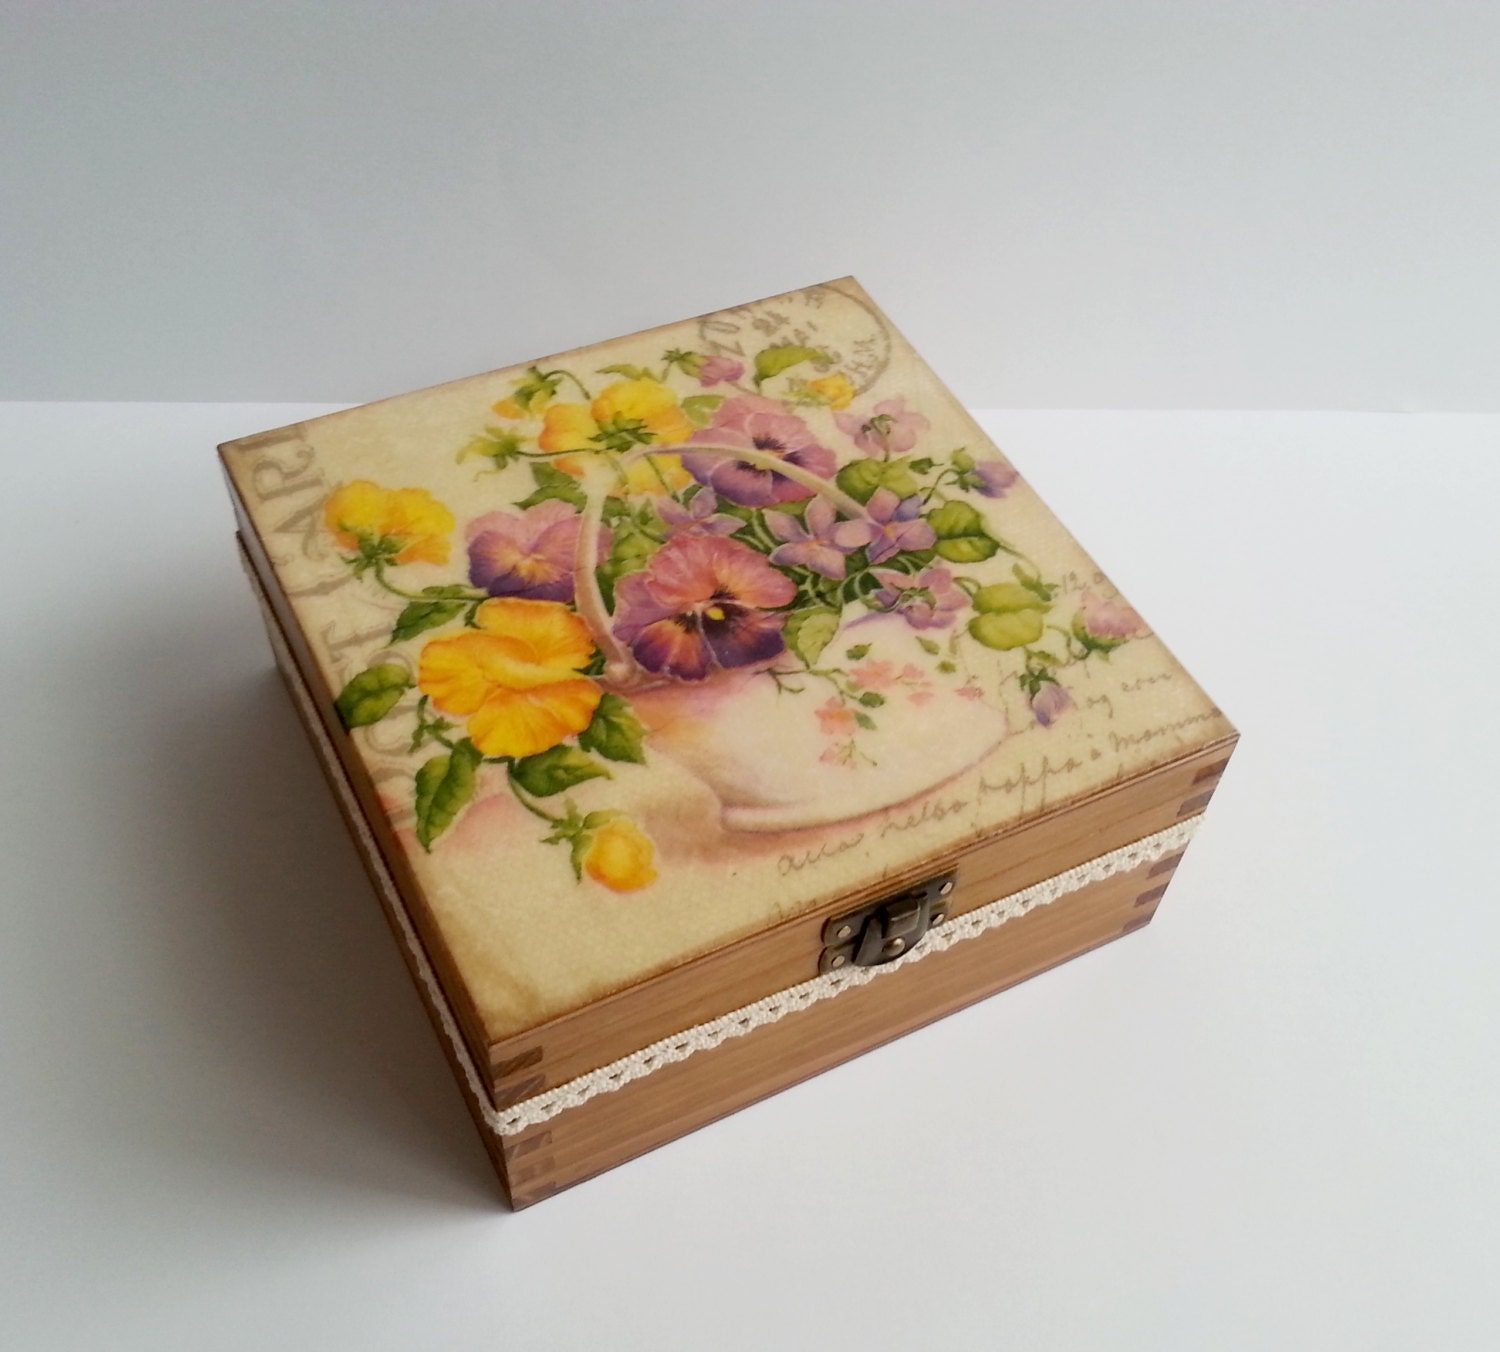 Decoupage wooden tea box with pansies cotton lace butterfly gift idea patinated antiqued box romantic style - MKedraDecoupage